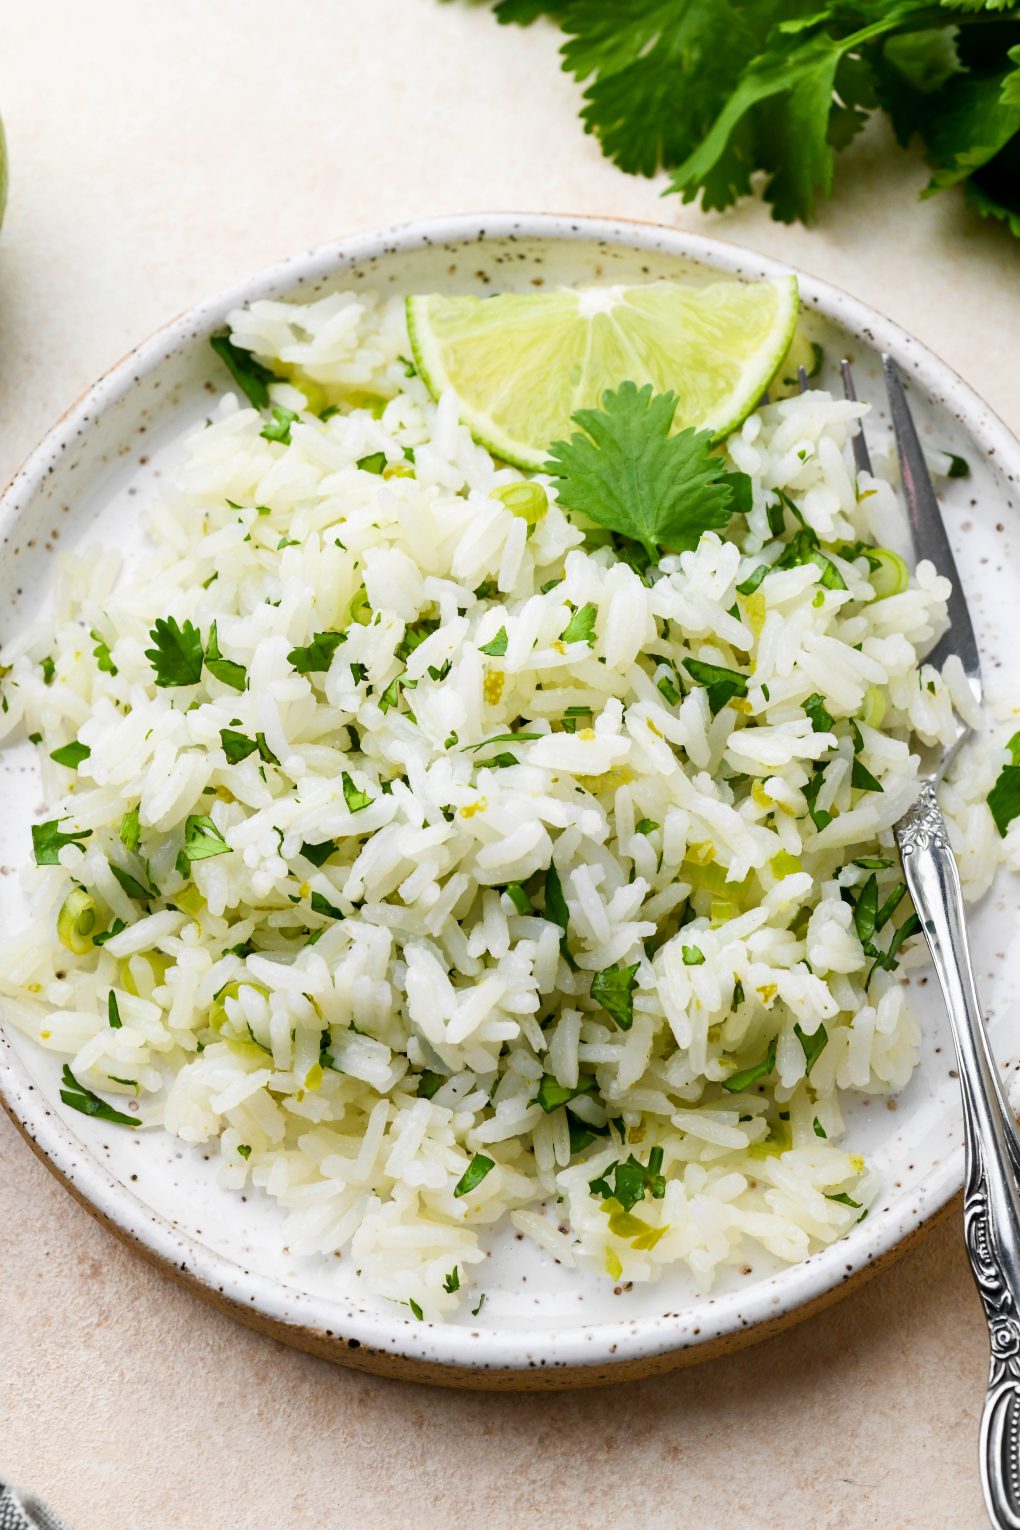 A small speckled ceramic plate of cilantro lime rice, topped with thinly sliced green onion, cilantro leaves, and lime wedges.